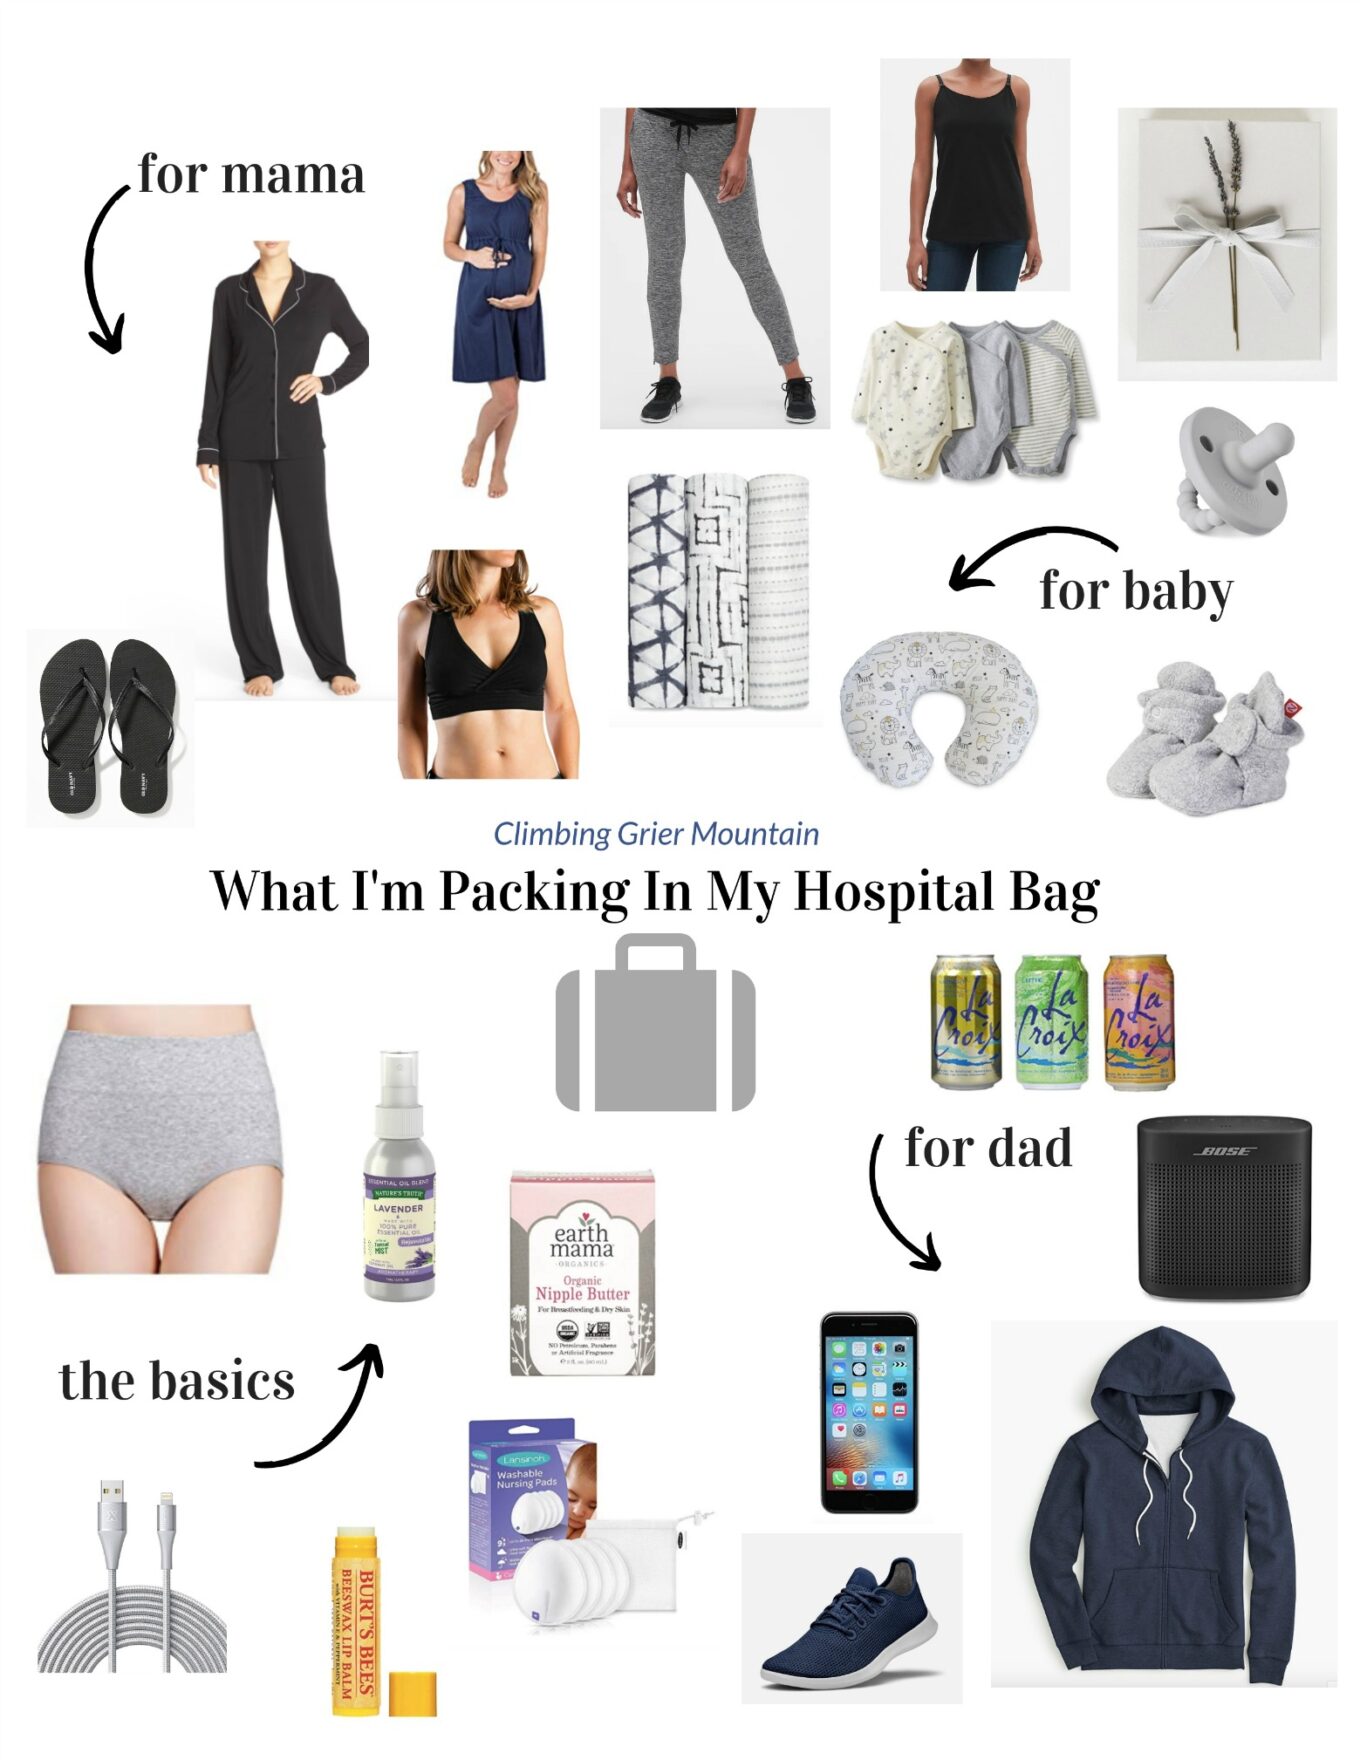 https://thecuriousplate.com/wp-content/uploads/2019/09/What-Im-Packing-In-My-Hospital-Bag-www.climbinggriermountain.com_.jpg